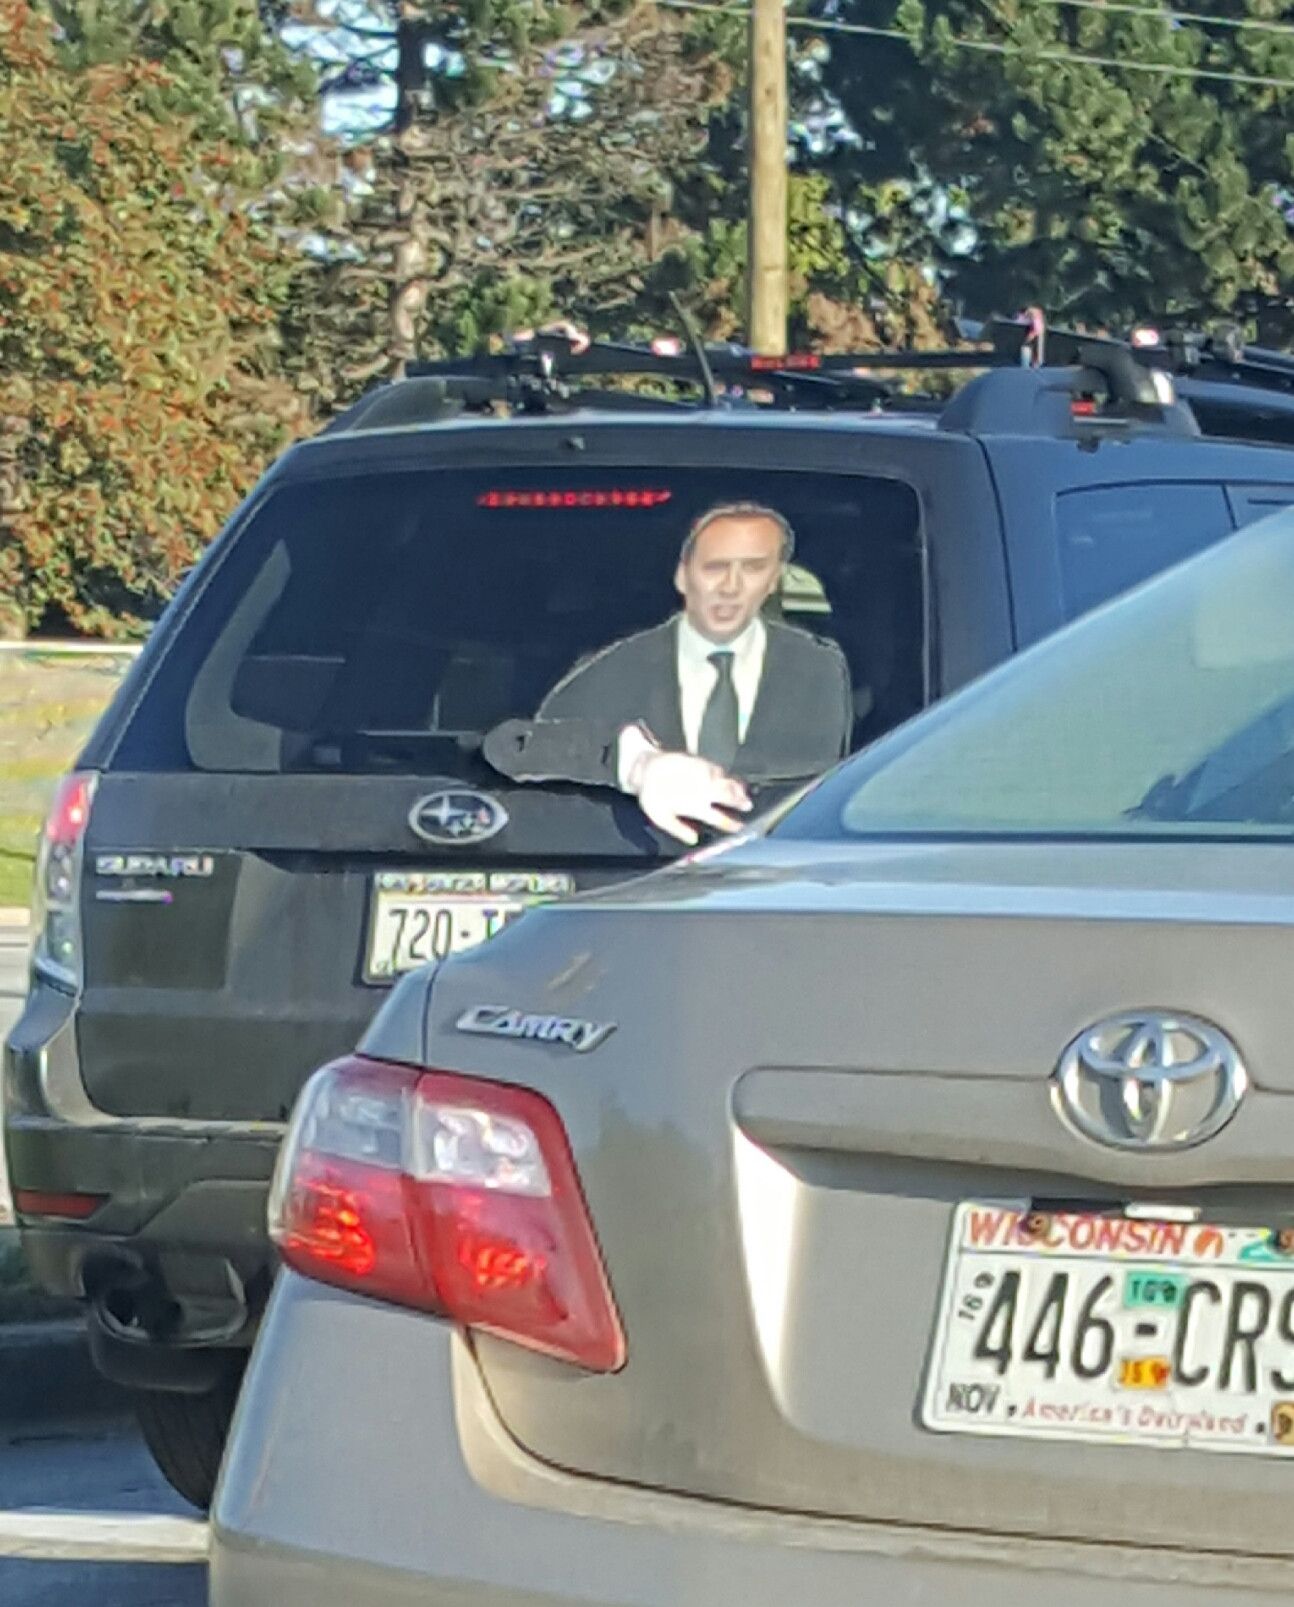 Saw this on my way to work today- they have a cardboard cutout of Nic Cage in the back window, with his arm attached to the rear wiper, so he can wave to everyone.